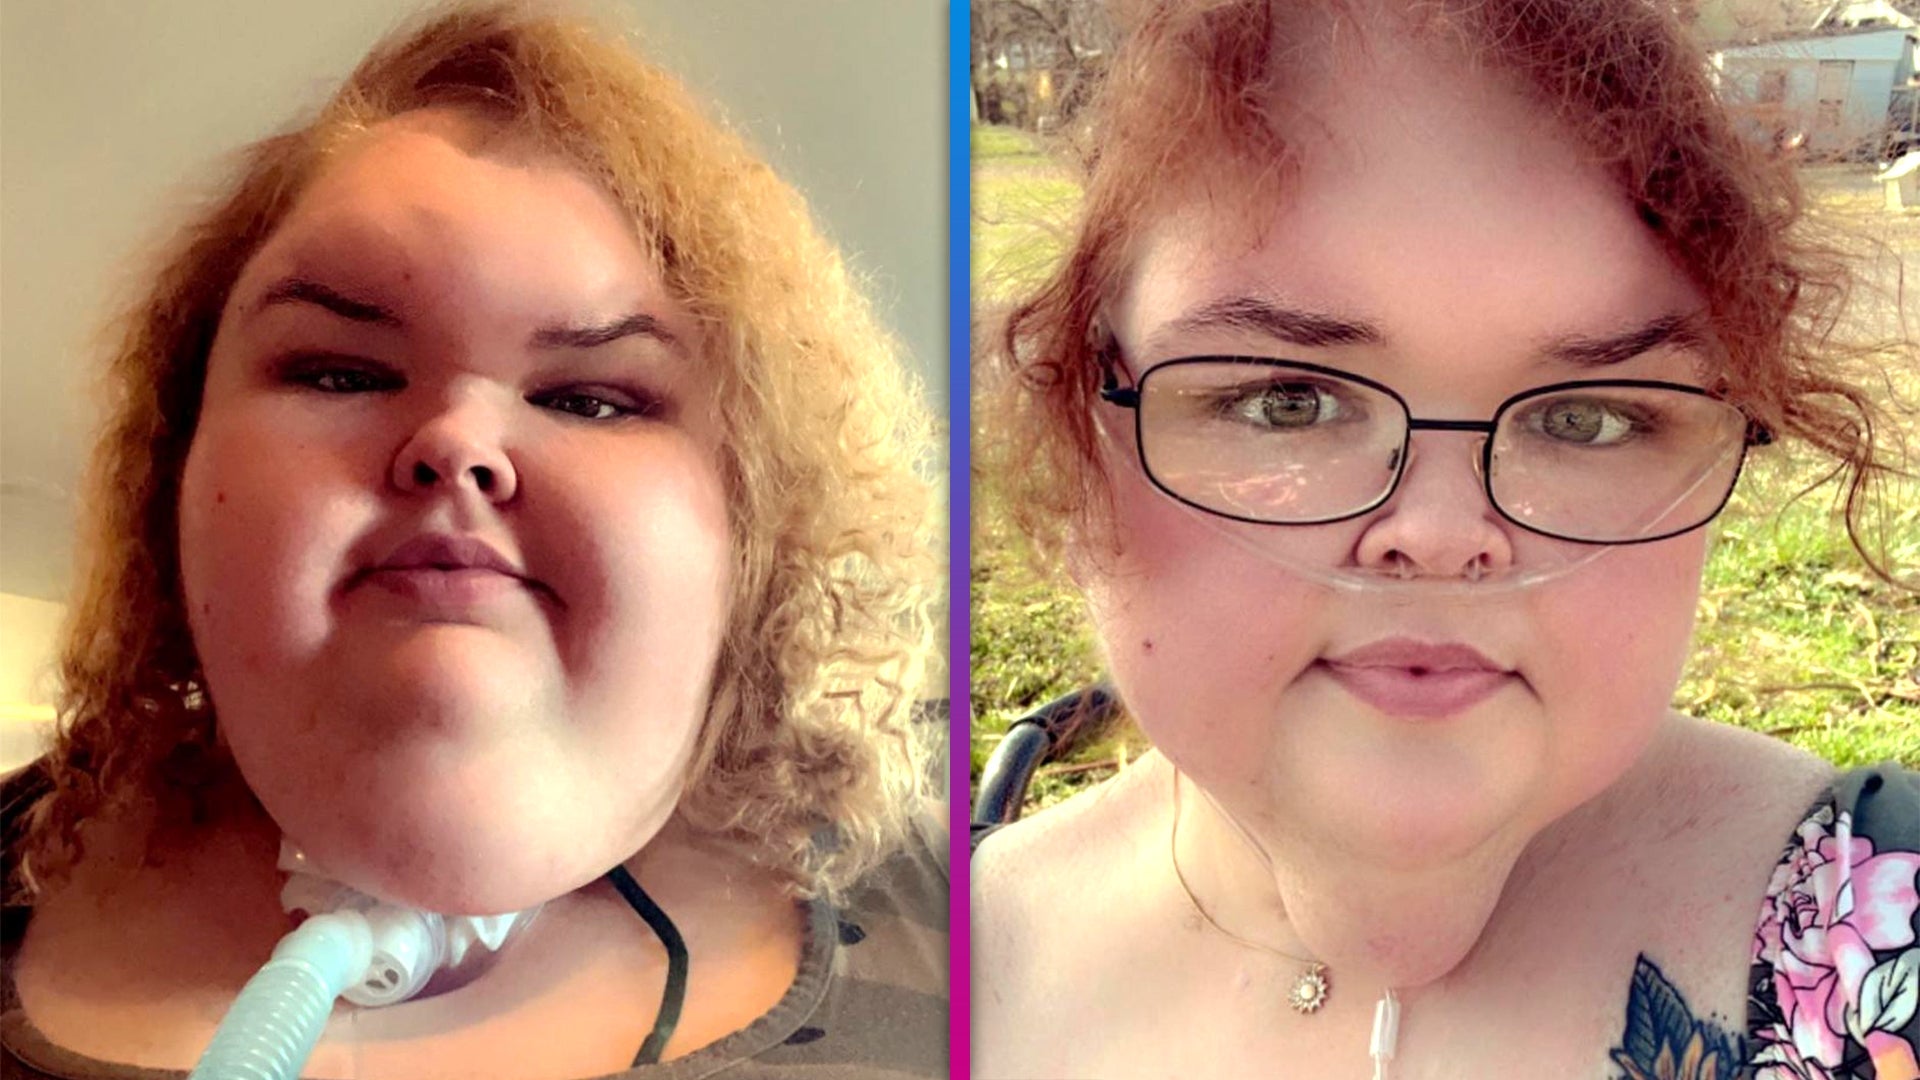 '1000-Lb. Sisters' Star Tammy Slaton Shows Off Dramatic Weight Loss